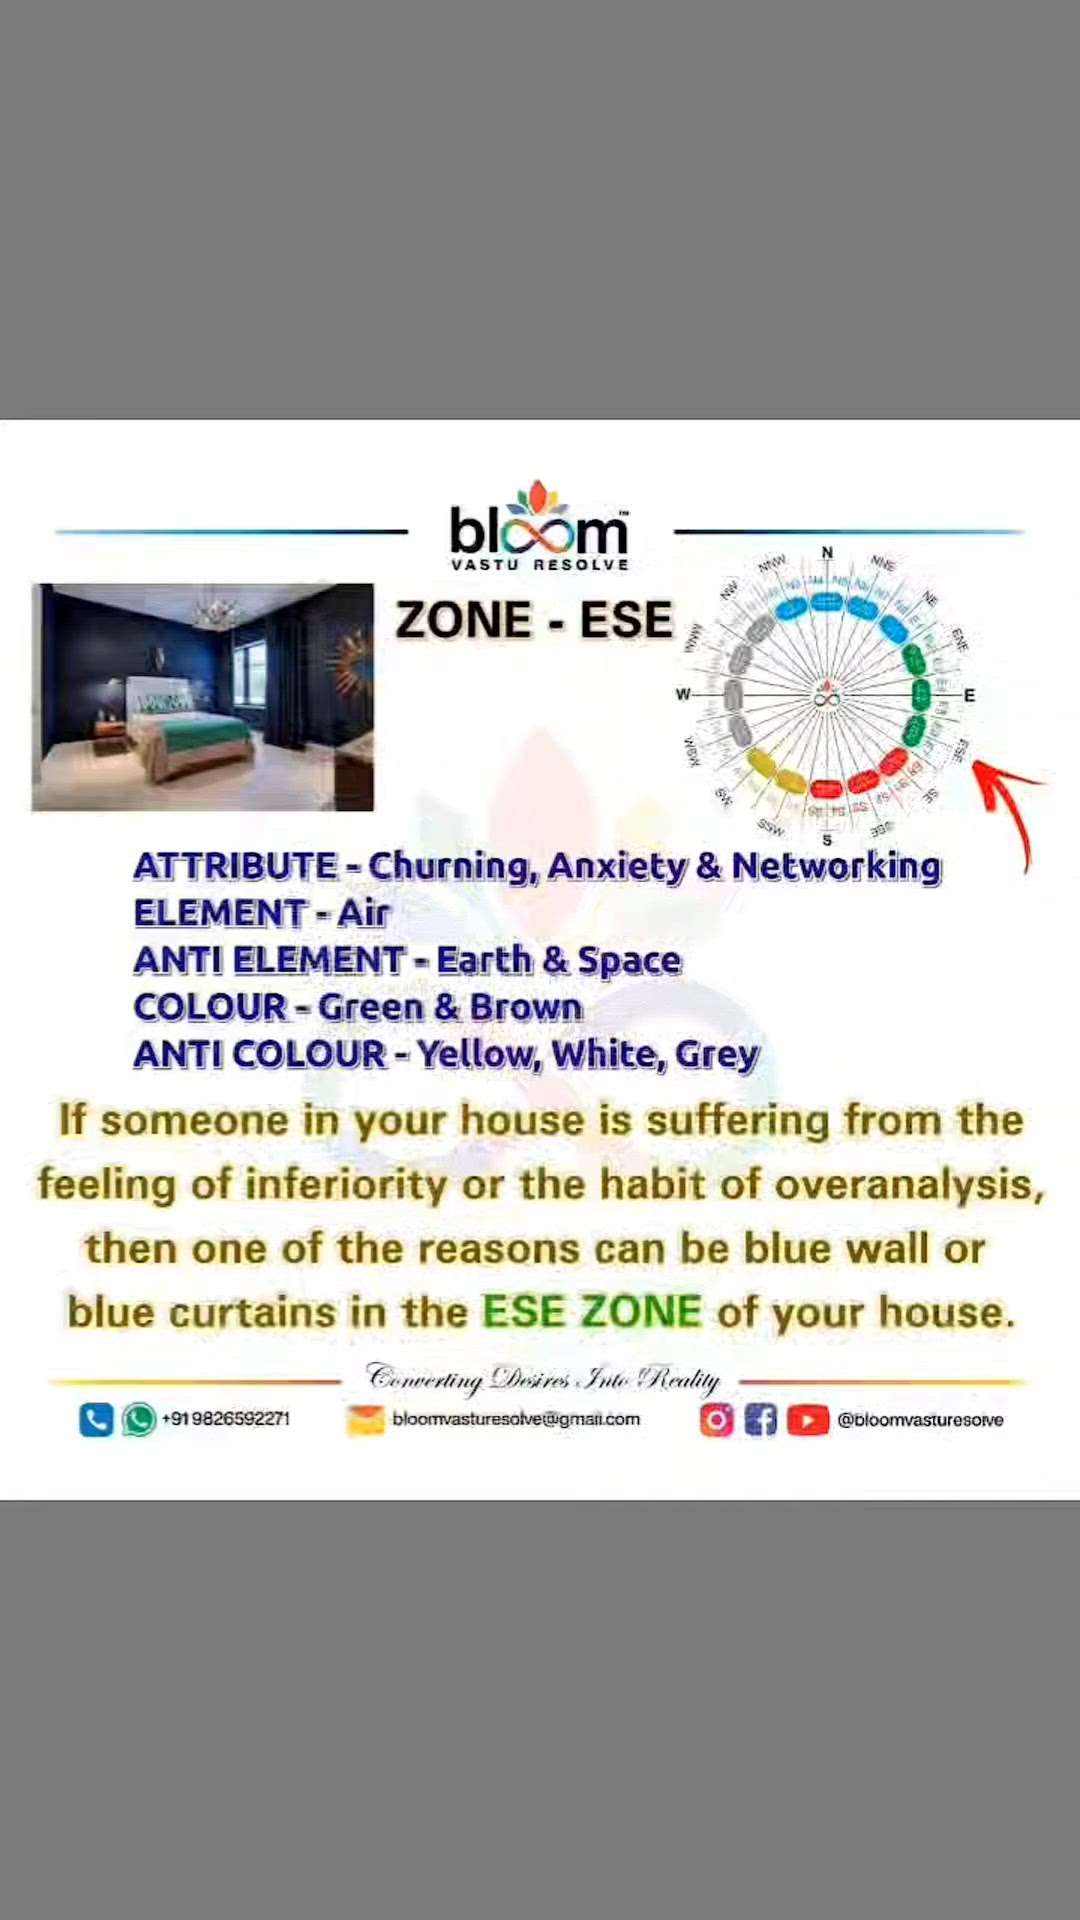 Your queries and comments are always welcome.
For more Vastu please follow @bloomvasturesolve
on YouTube, Instagram & Facebook
.
.
For personal consultation, feel free to contact certified MahaVastu Expert through
M - 9826592271
Or
bloomvasturesolve@gmail.com
#vastu #वास्तु #mahavastu #mahavastuexpert #bloomvasturesolve  #vastureels #vastulogy #vastuexpert  #vasturemedies  #vastuforhome #vastuforpeace #vastudosh #numerology #vastuforgrowth #numerology #esezone #depression #anxiety